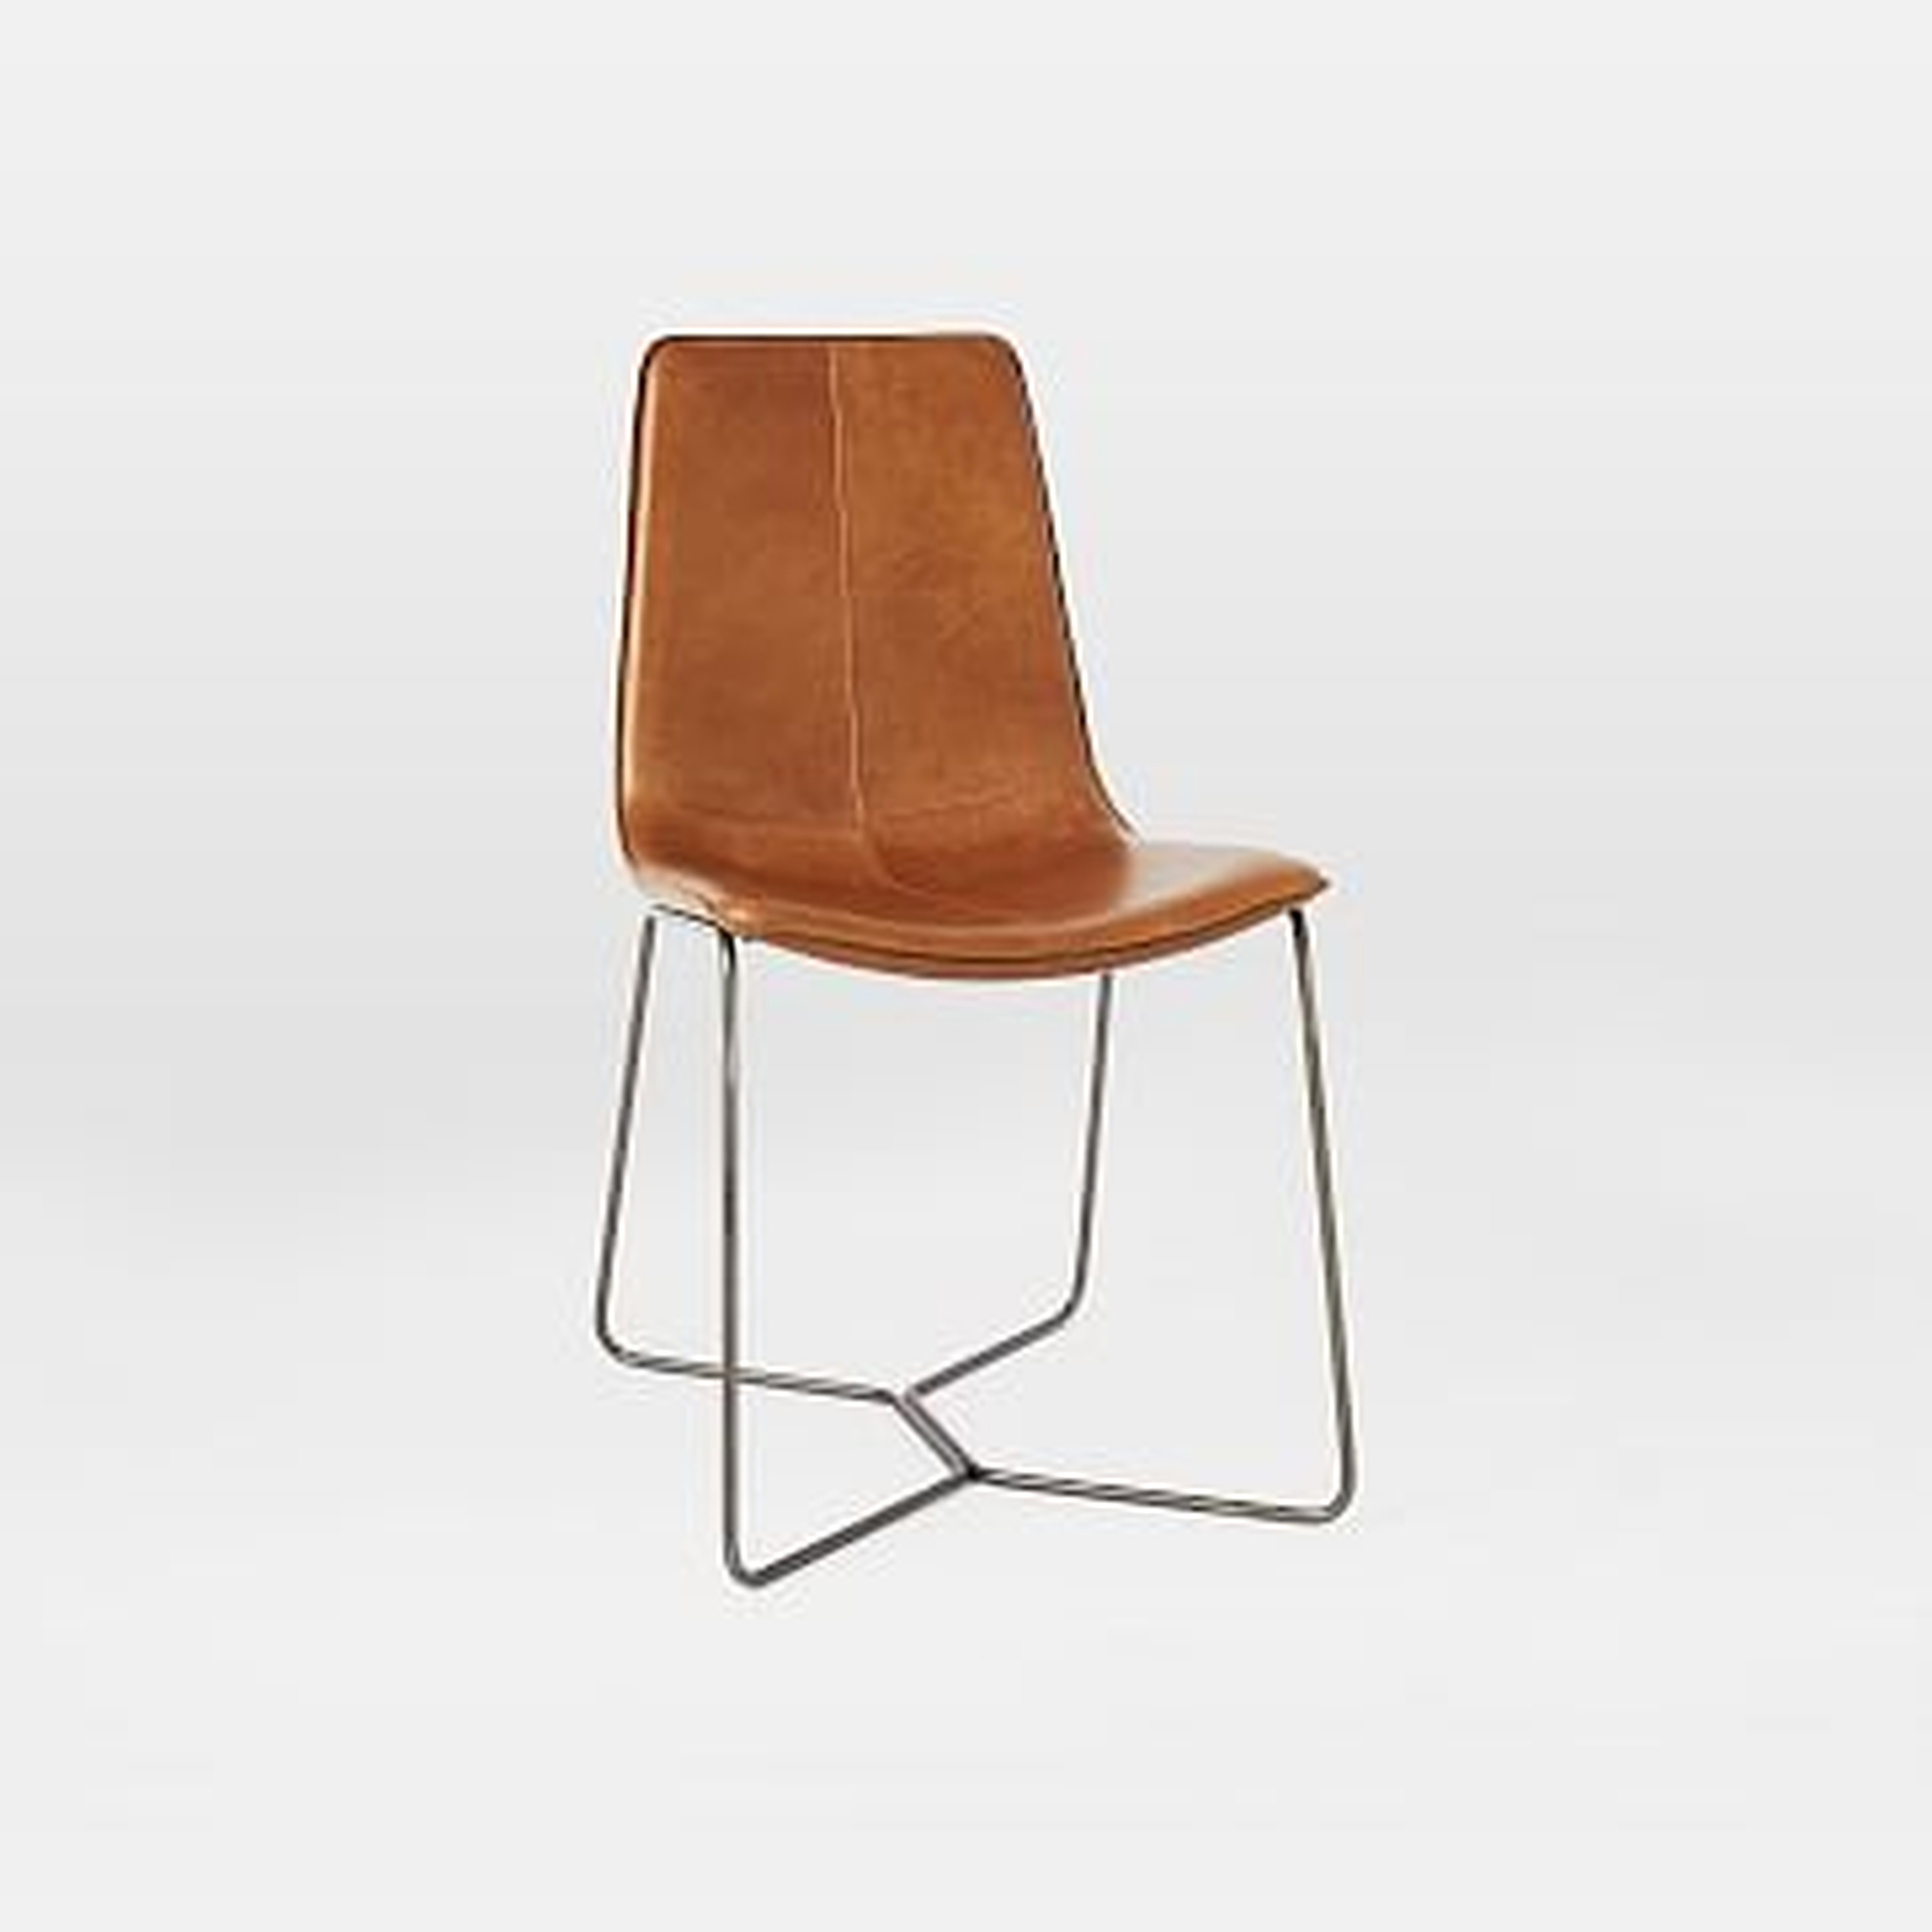 Leather Slope Dining Chair Saddle - West Elm